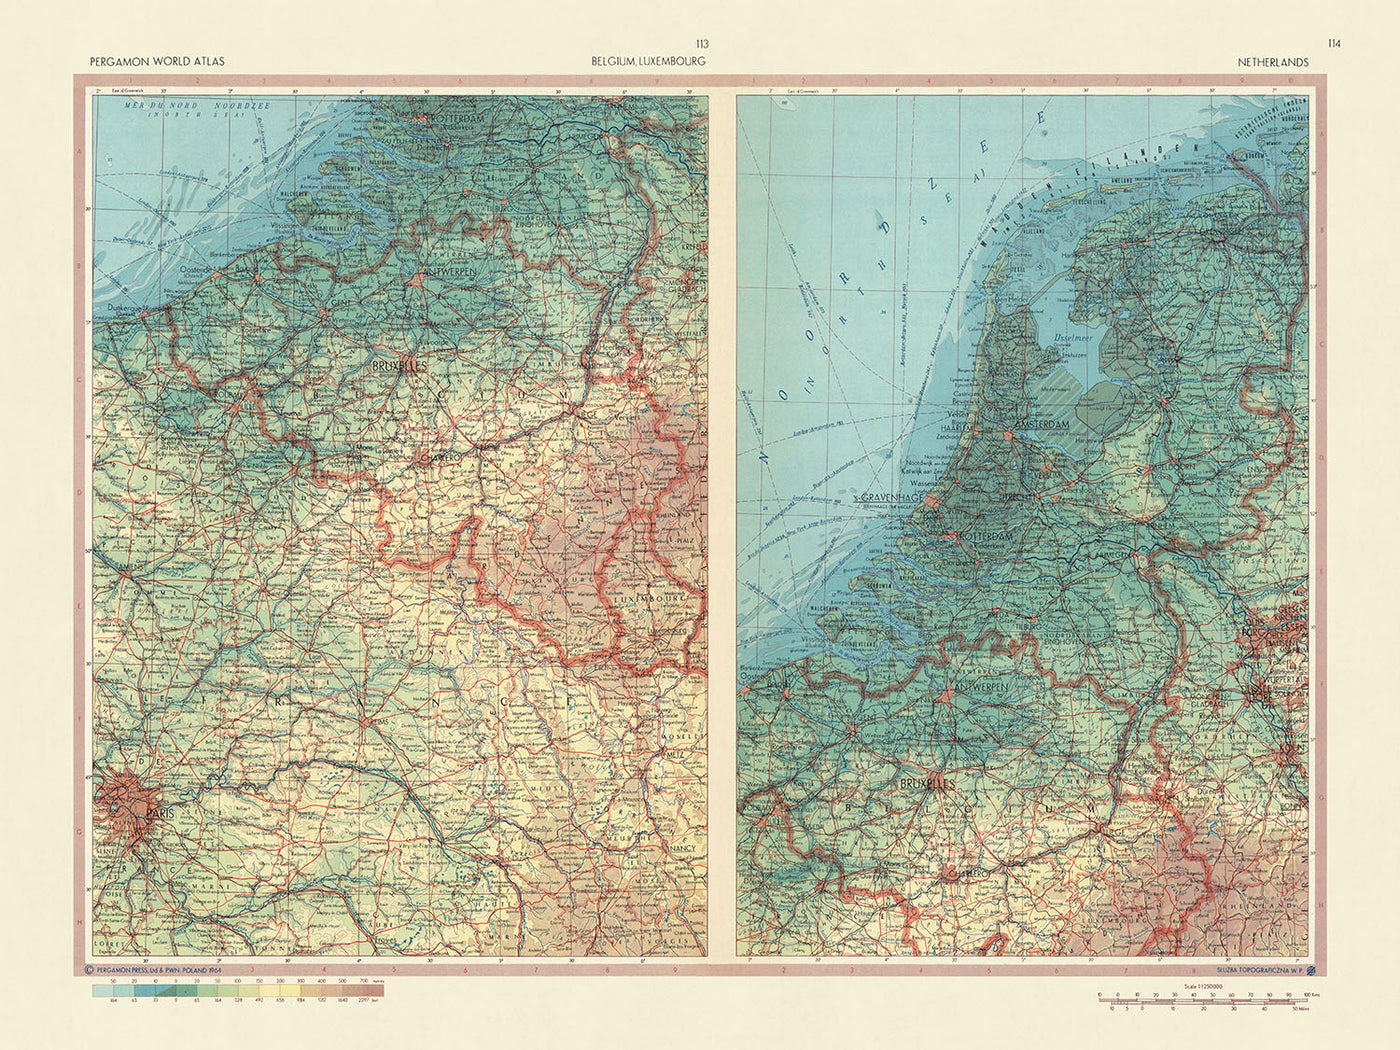 Old Map of Belgium, Luxembourg & Netherlands, 1967: Boundaries, Physical Landscape, Major Cities, Rivers, Mountain Ranges